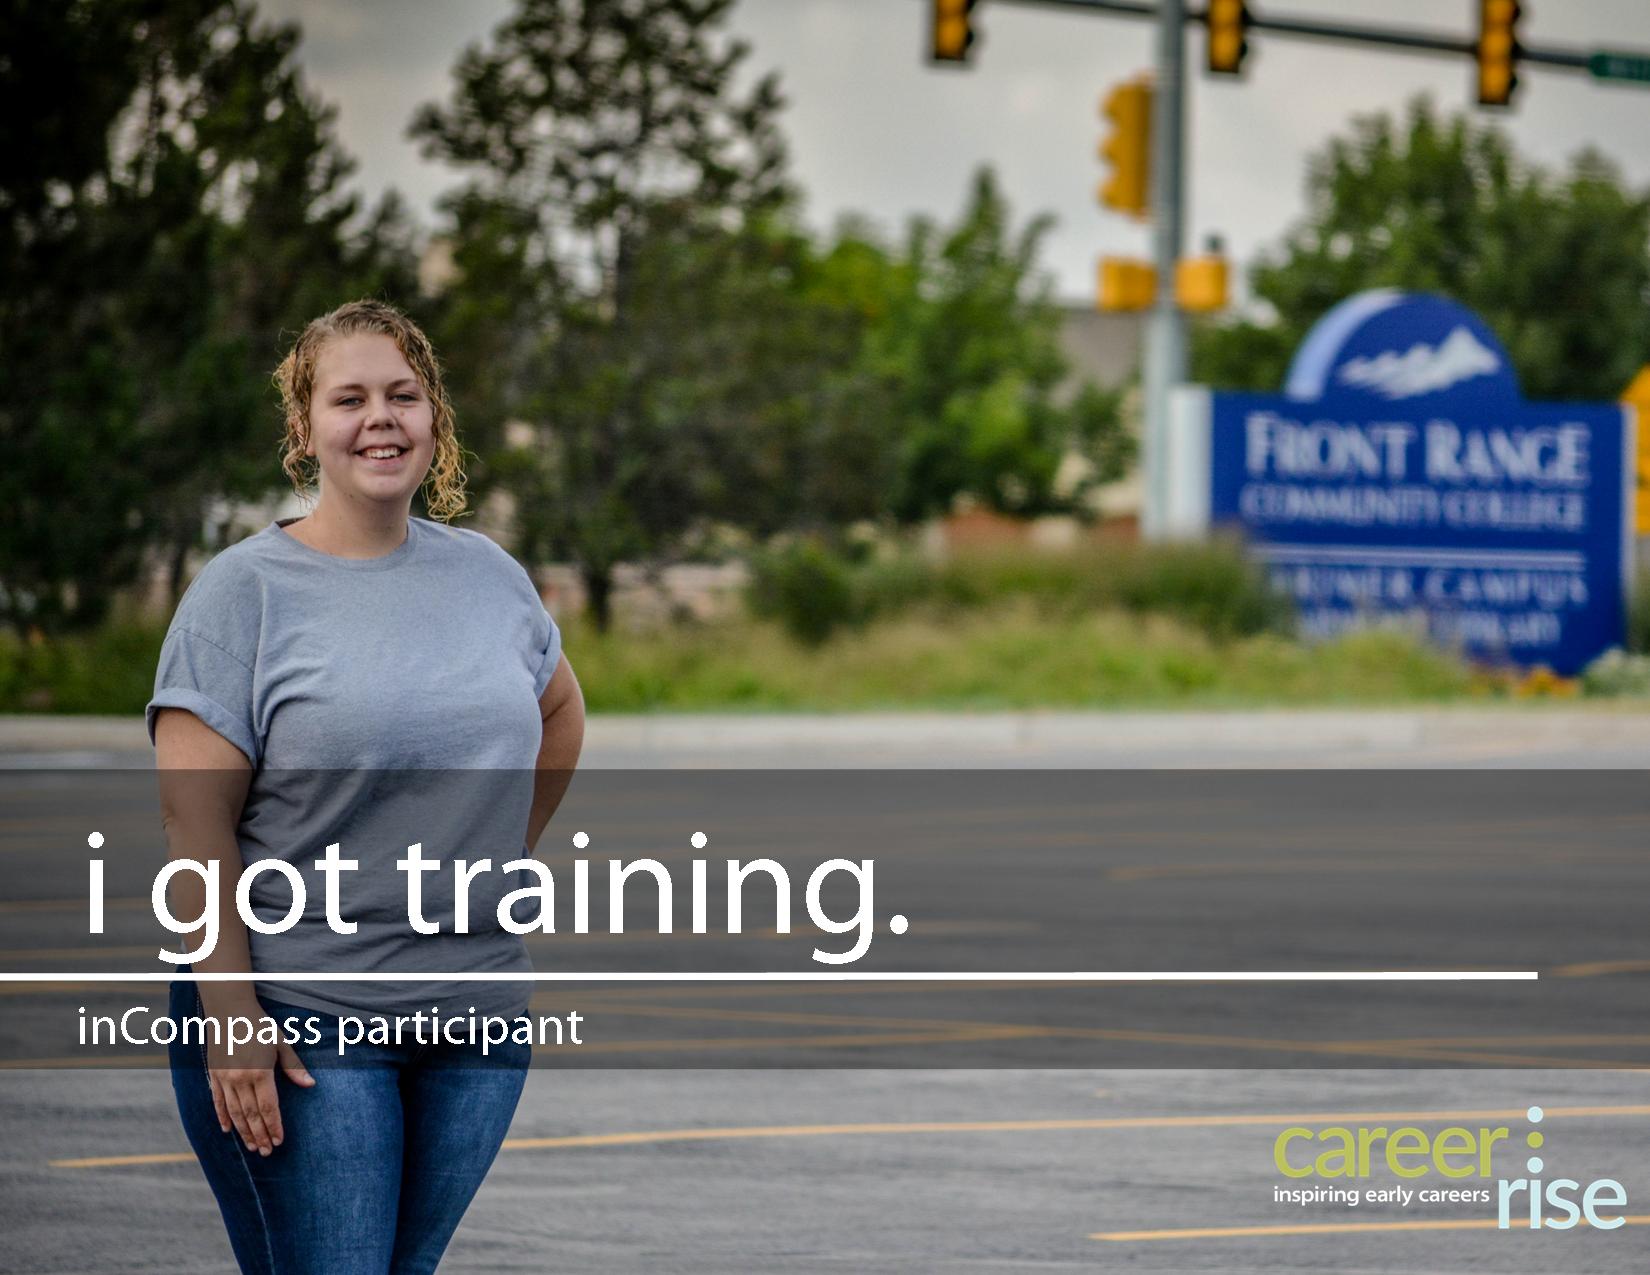 Image 5: Working with an inCompass Program tutor, Alissa achieved her GED and went on to Front Range Community College